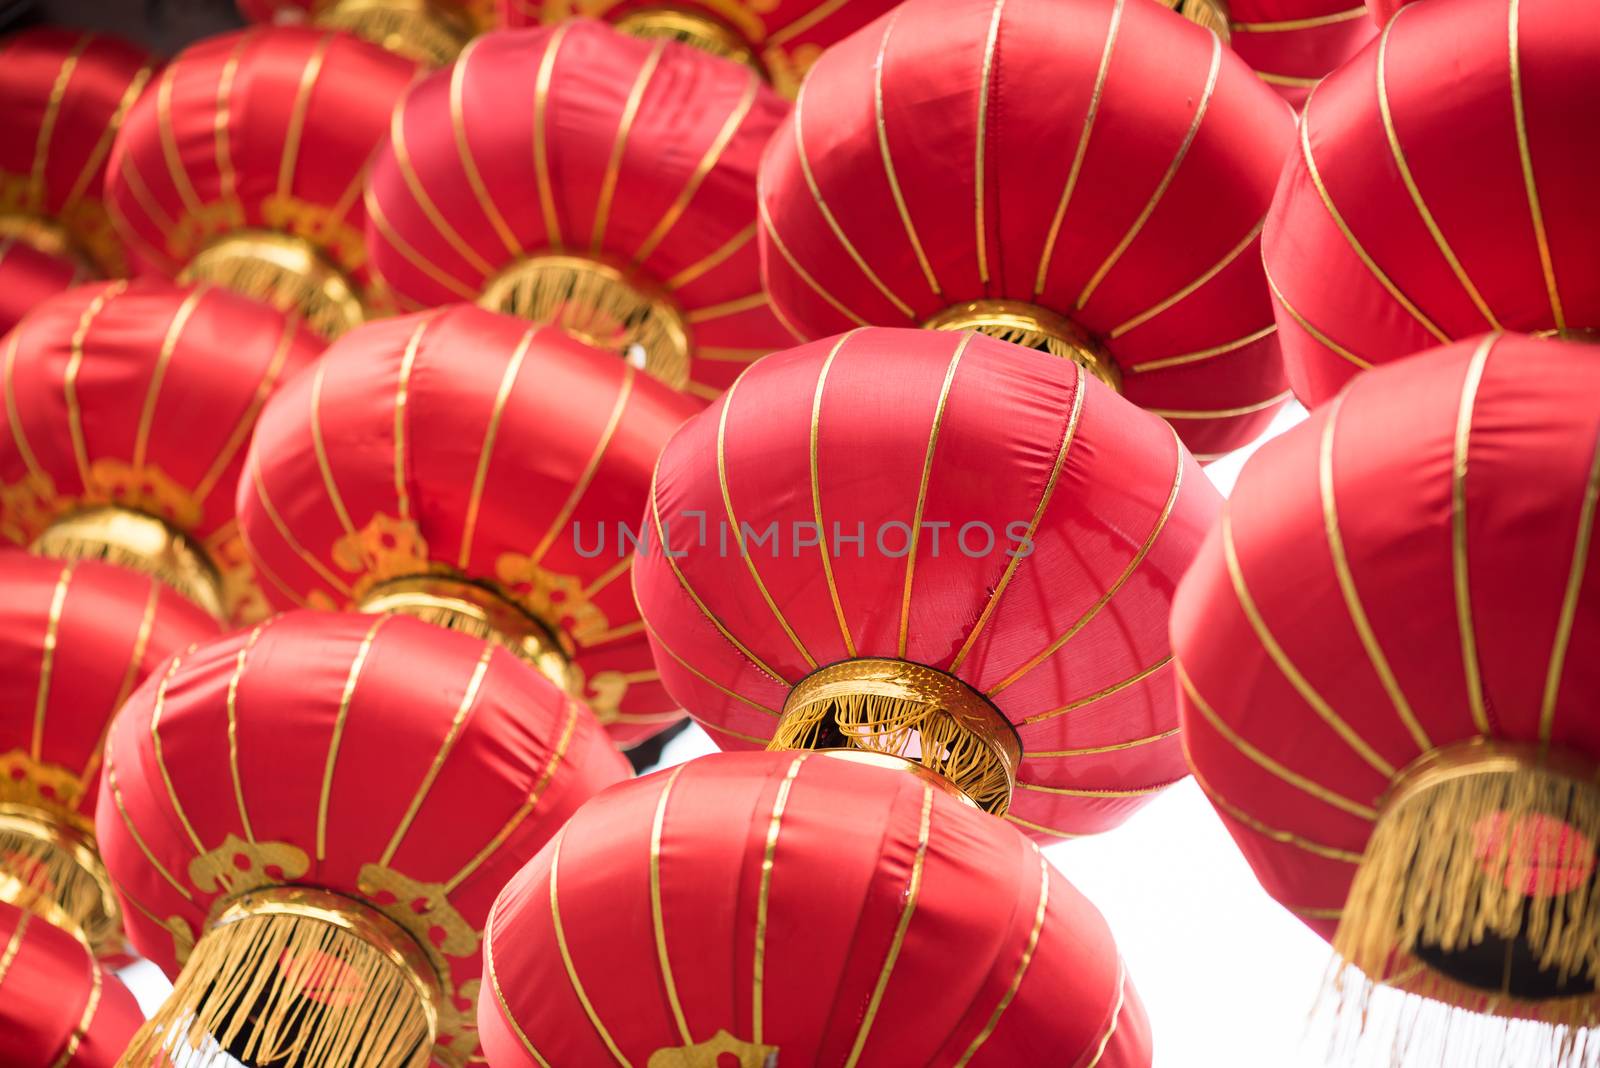 Group of red chinese lanterns with chinese traditional architecture in the background, Chengdu, China